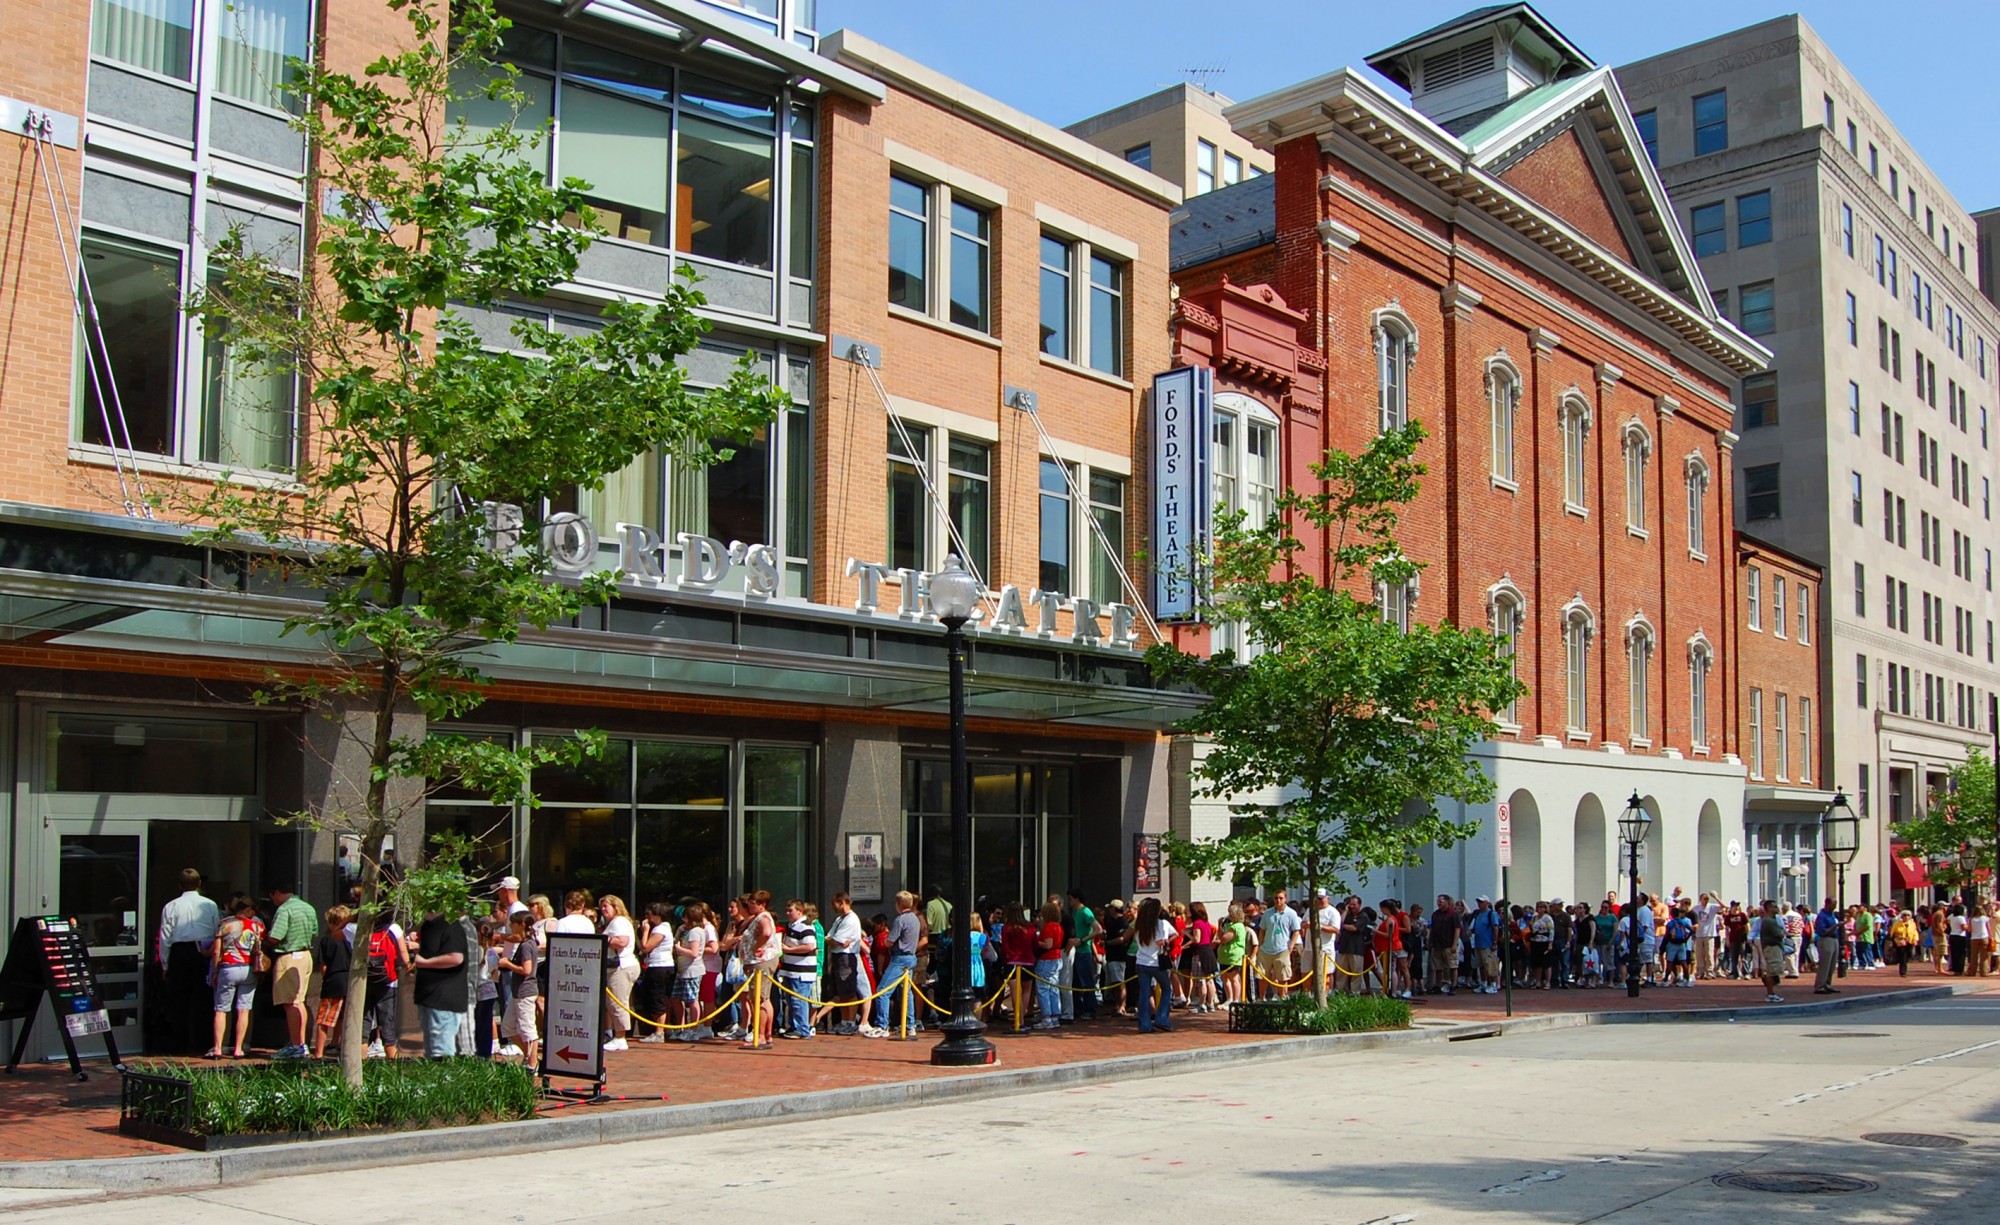 Exterior of Ford's Theatre on a sunny day. A line of patrons stretches across the lobby and historic theatre.